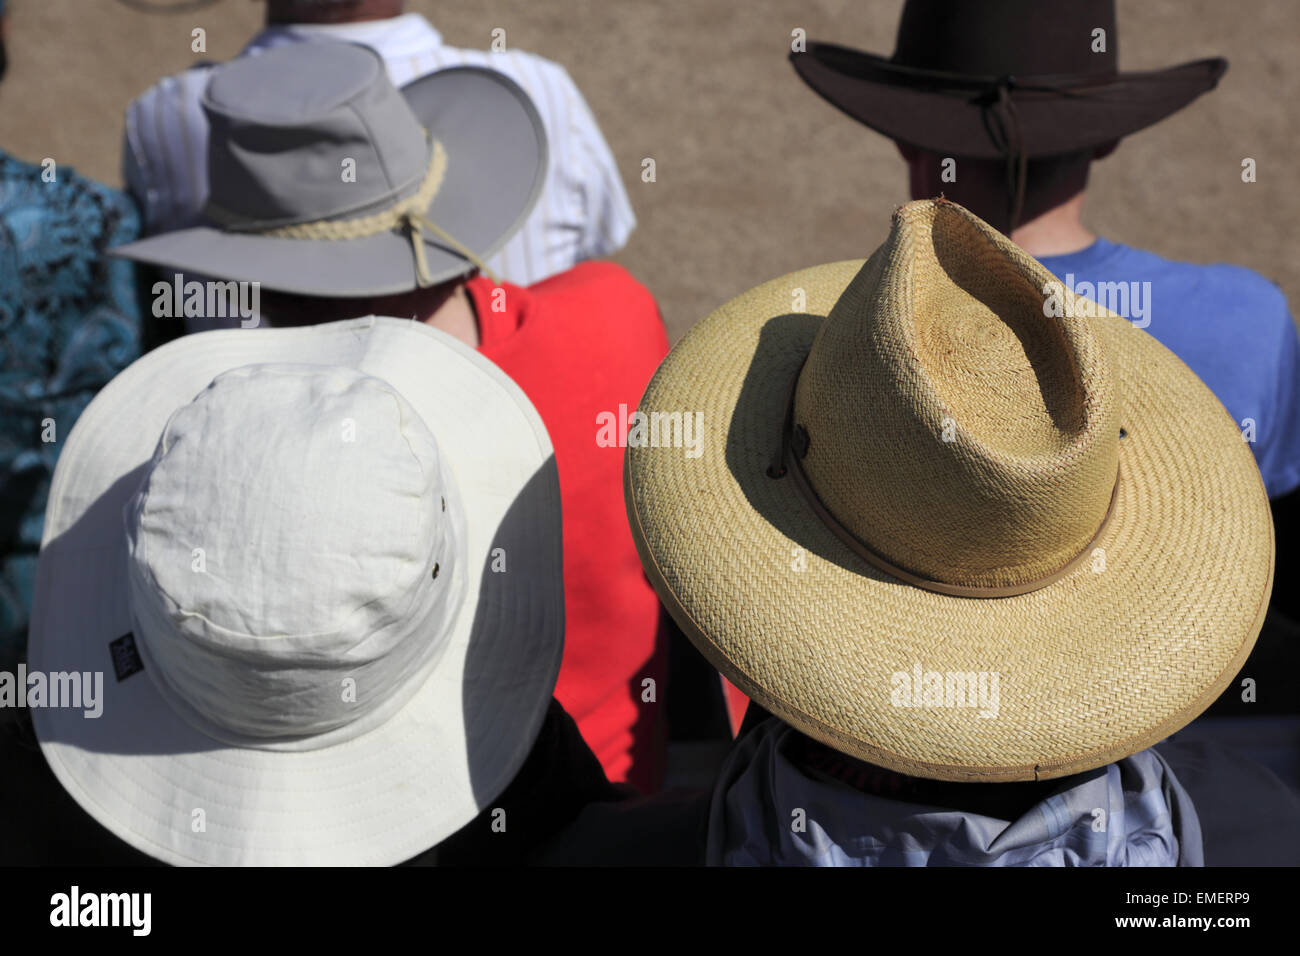 different style hats wearing by people outside under sun, Tucson Arizona, USA Stock Photo